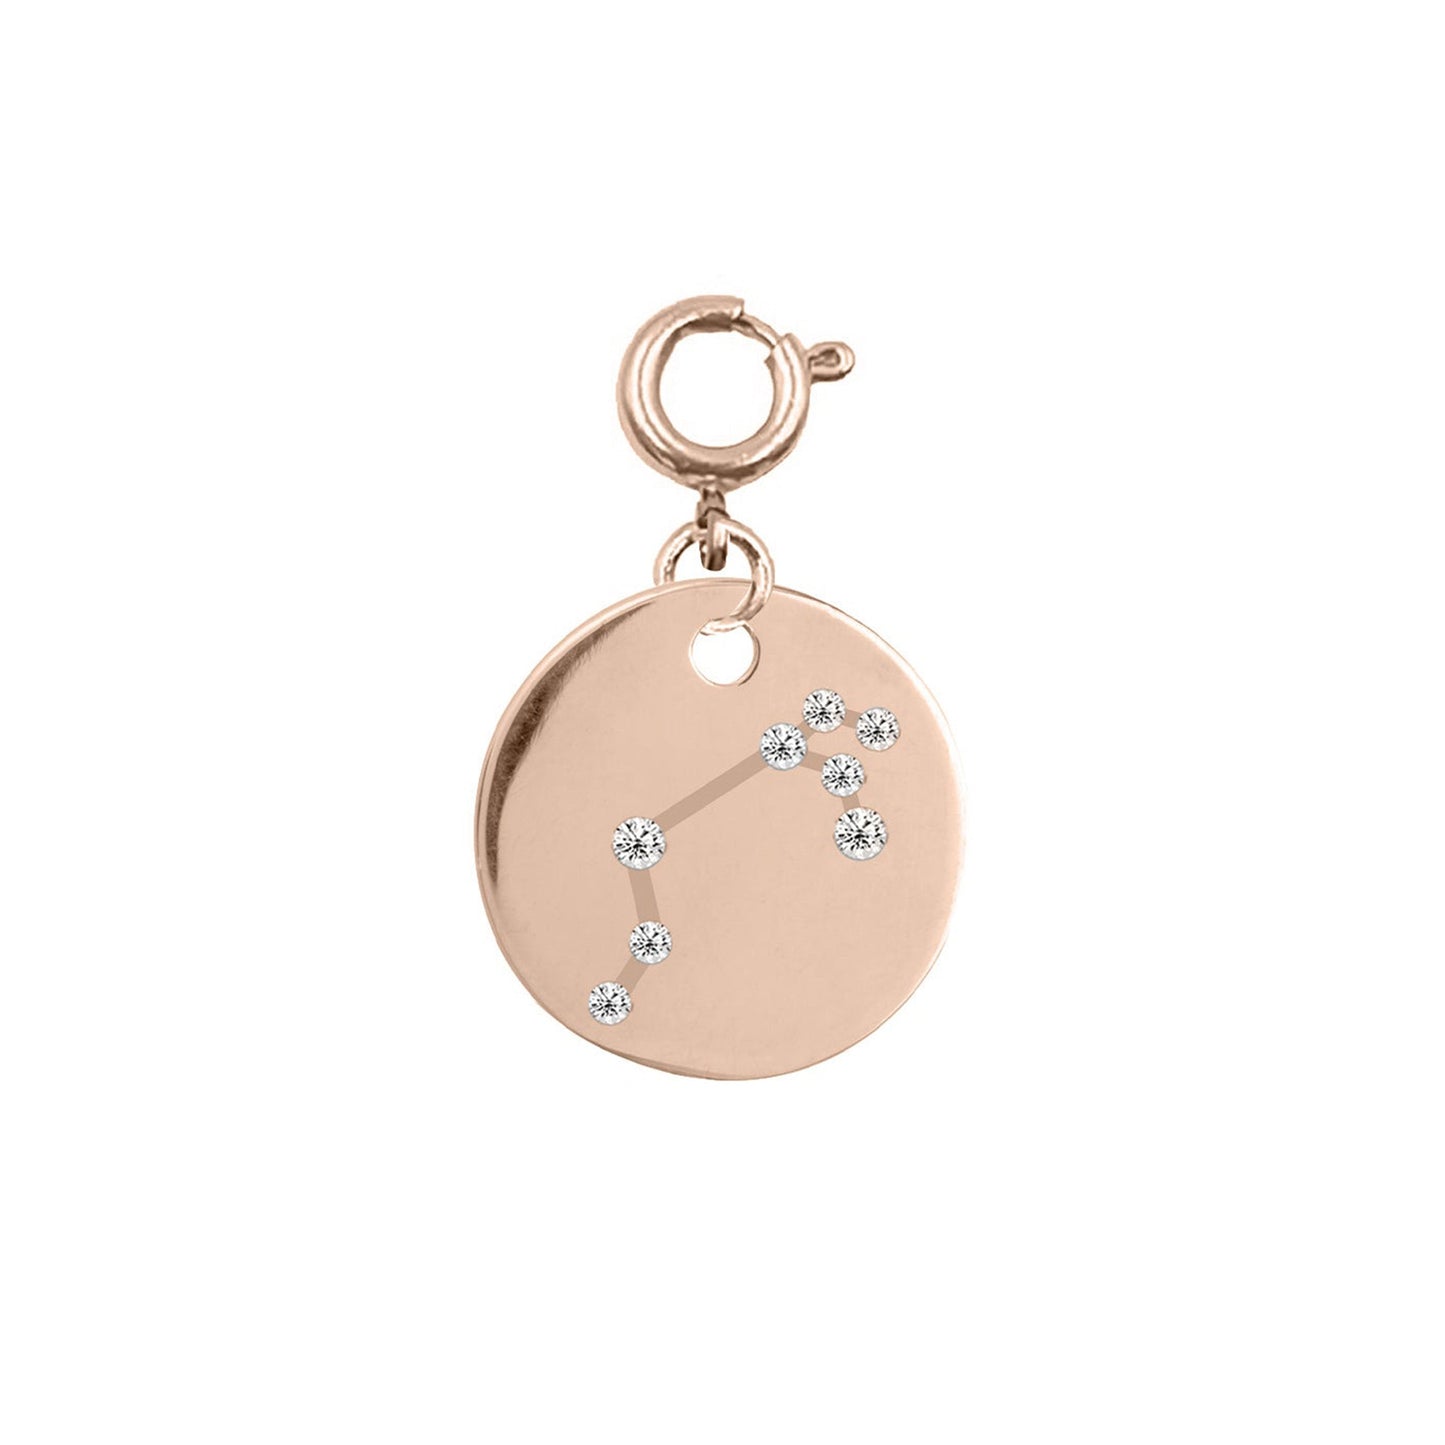 Maker Collection - Rose Gold Aries Zodiac Charm (Mar 21 - Apr 19)